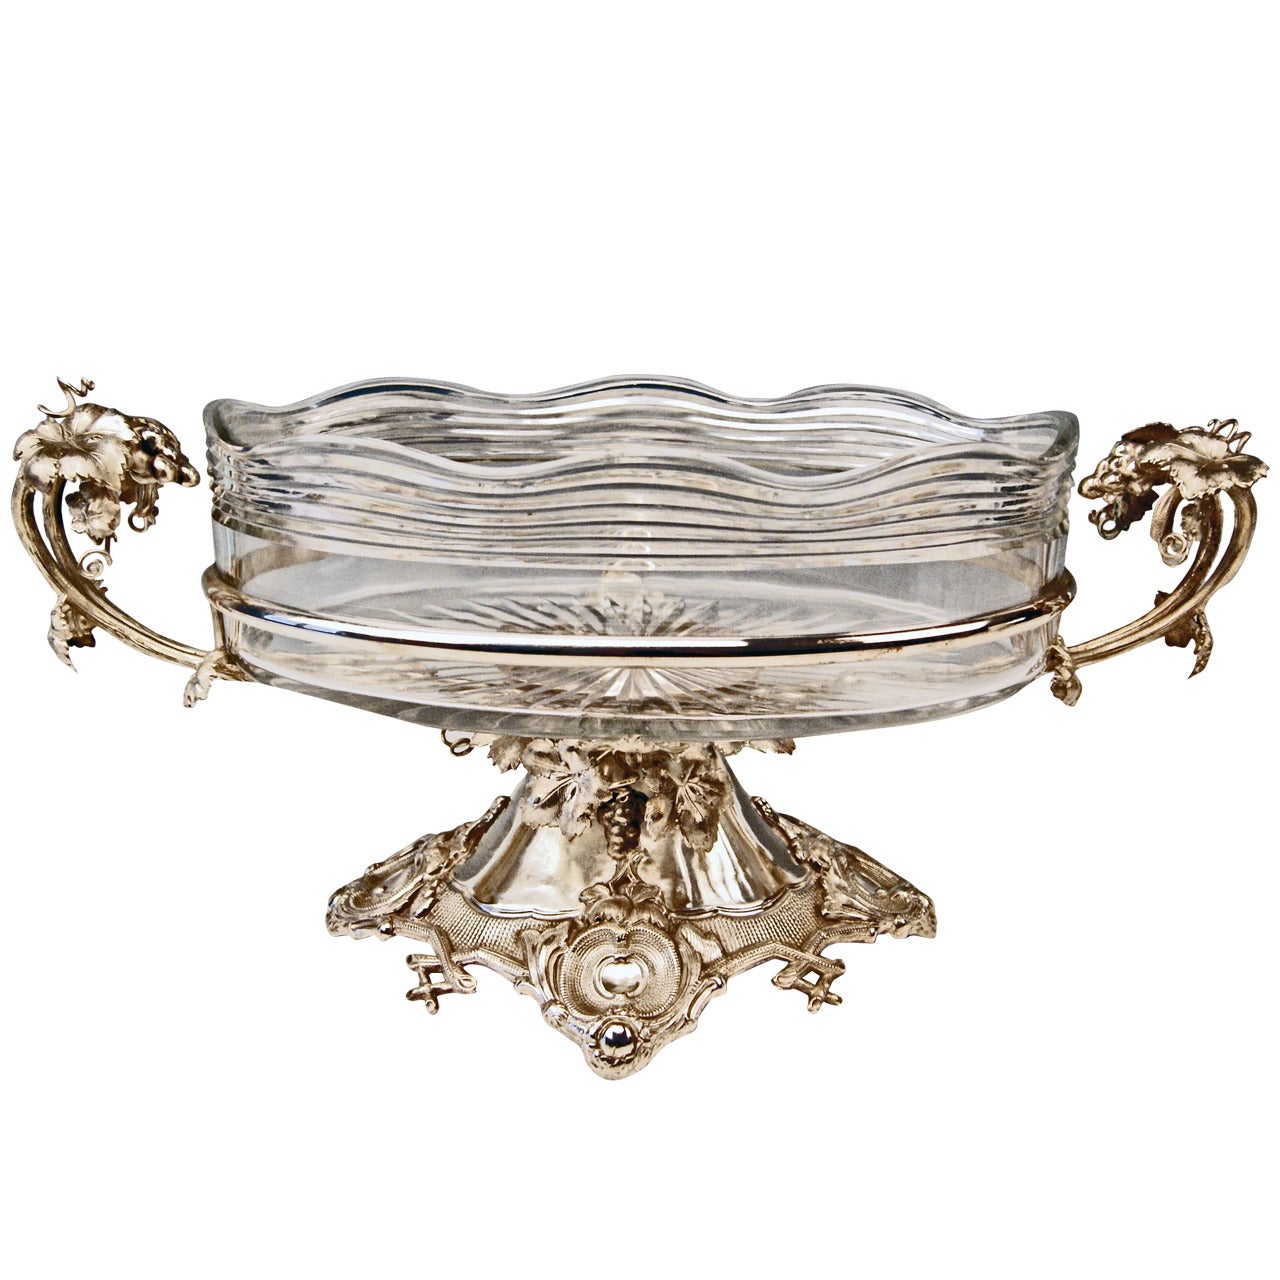 Huge German Silver Flower Bowl with Glass Liner by Nicolassen, circa 1870